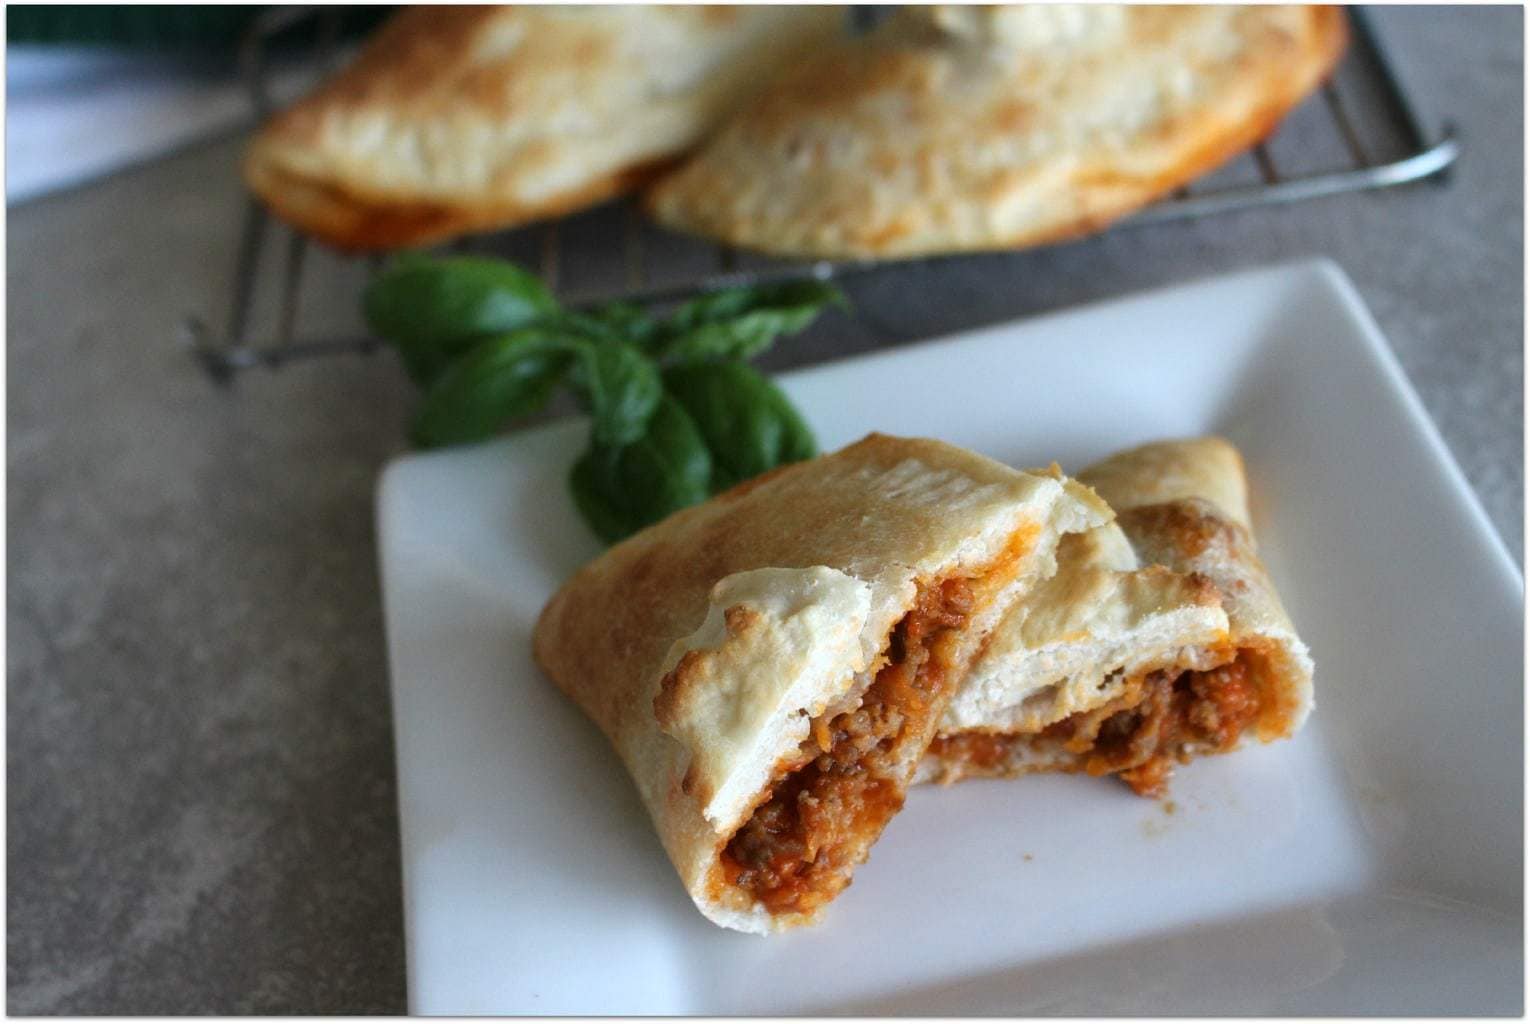 This Mini sausage calzone recipe is so easy, and my kids raved over how delicious they were! These would make a great lunch, dinner, and perfect appetizers for a party. I love easy recipes! 